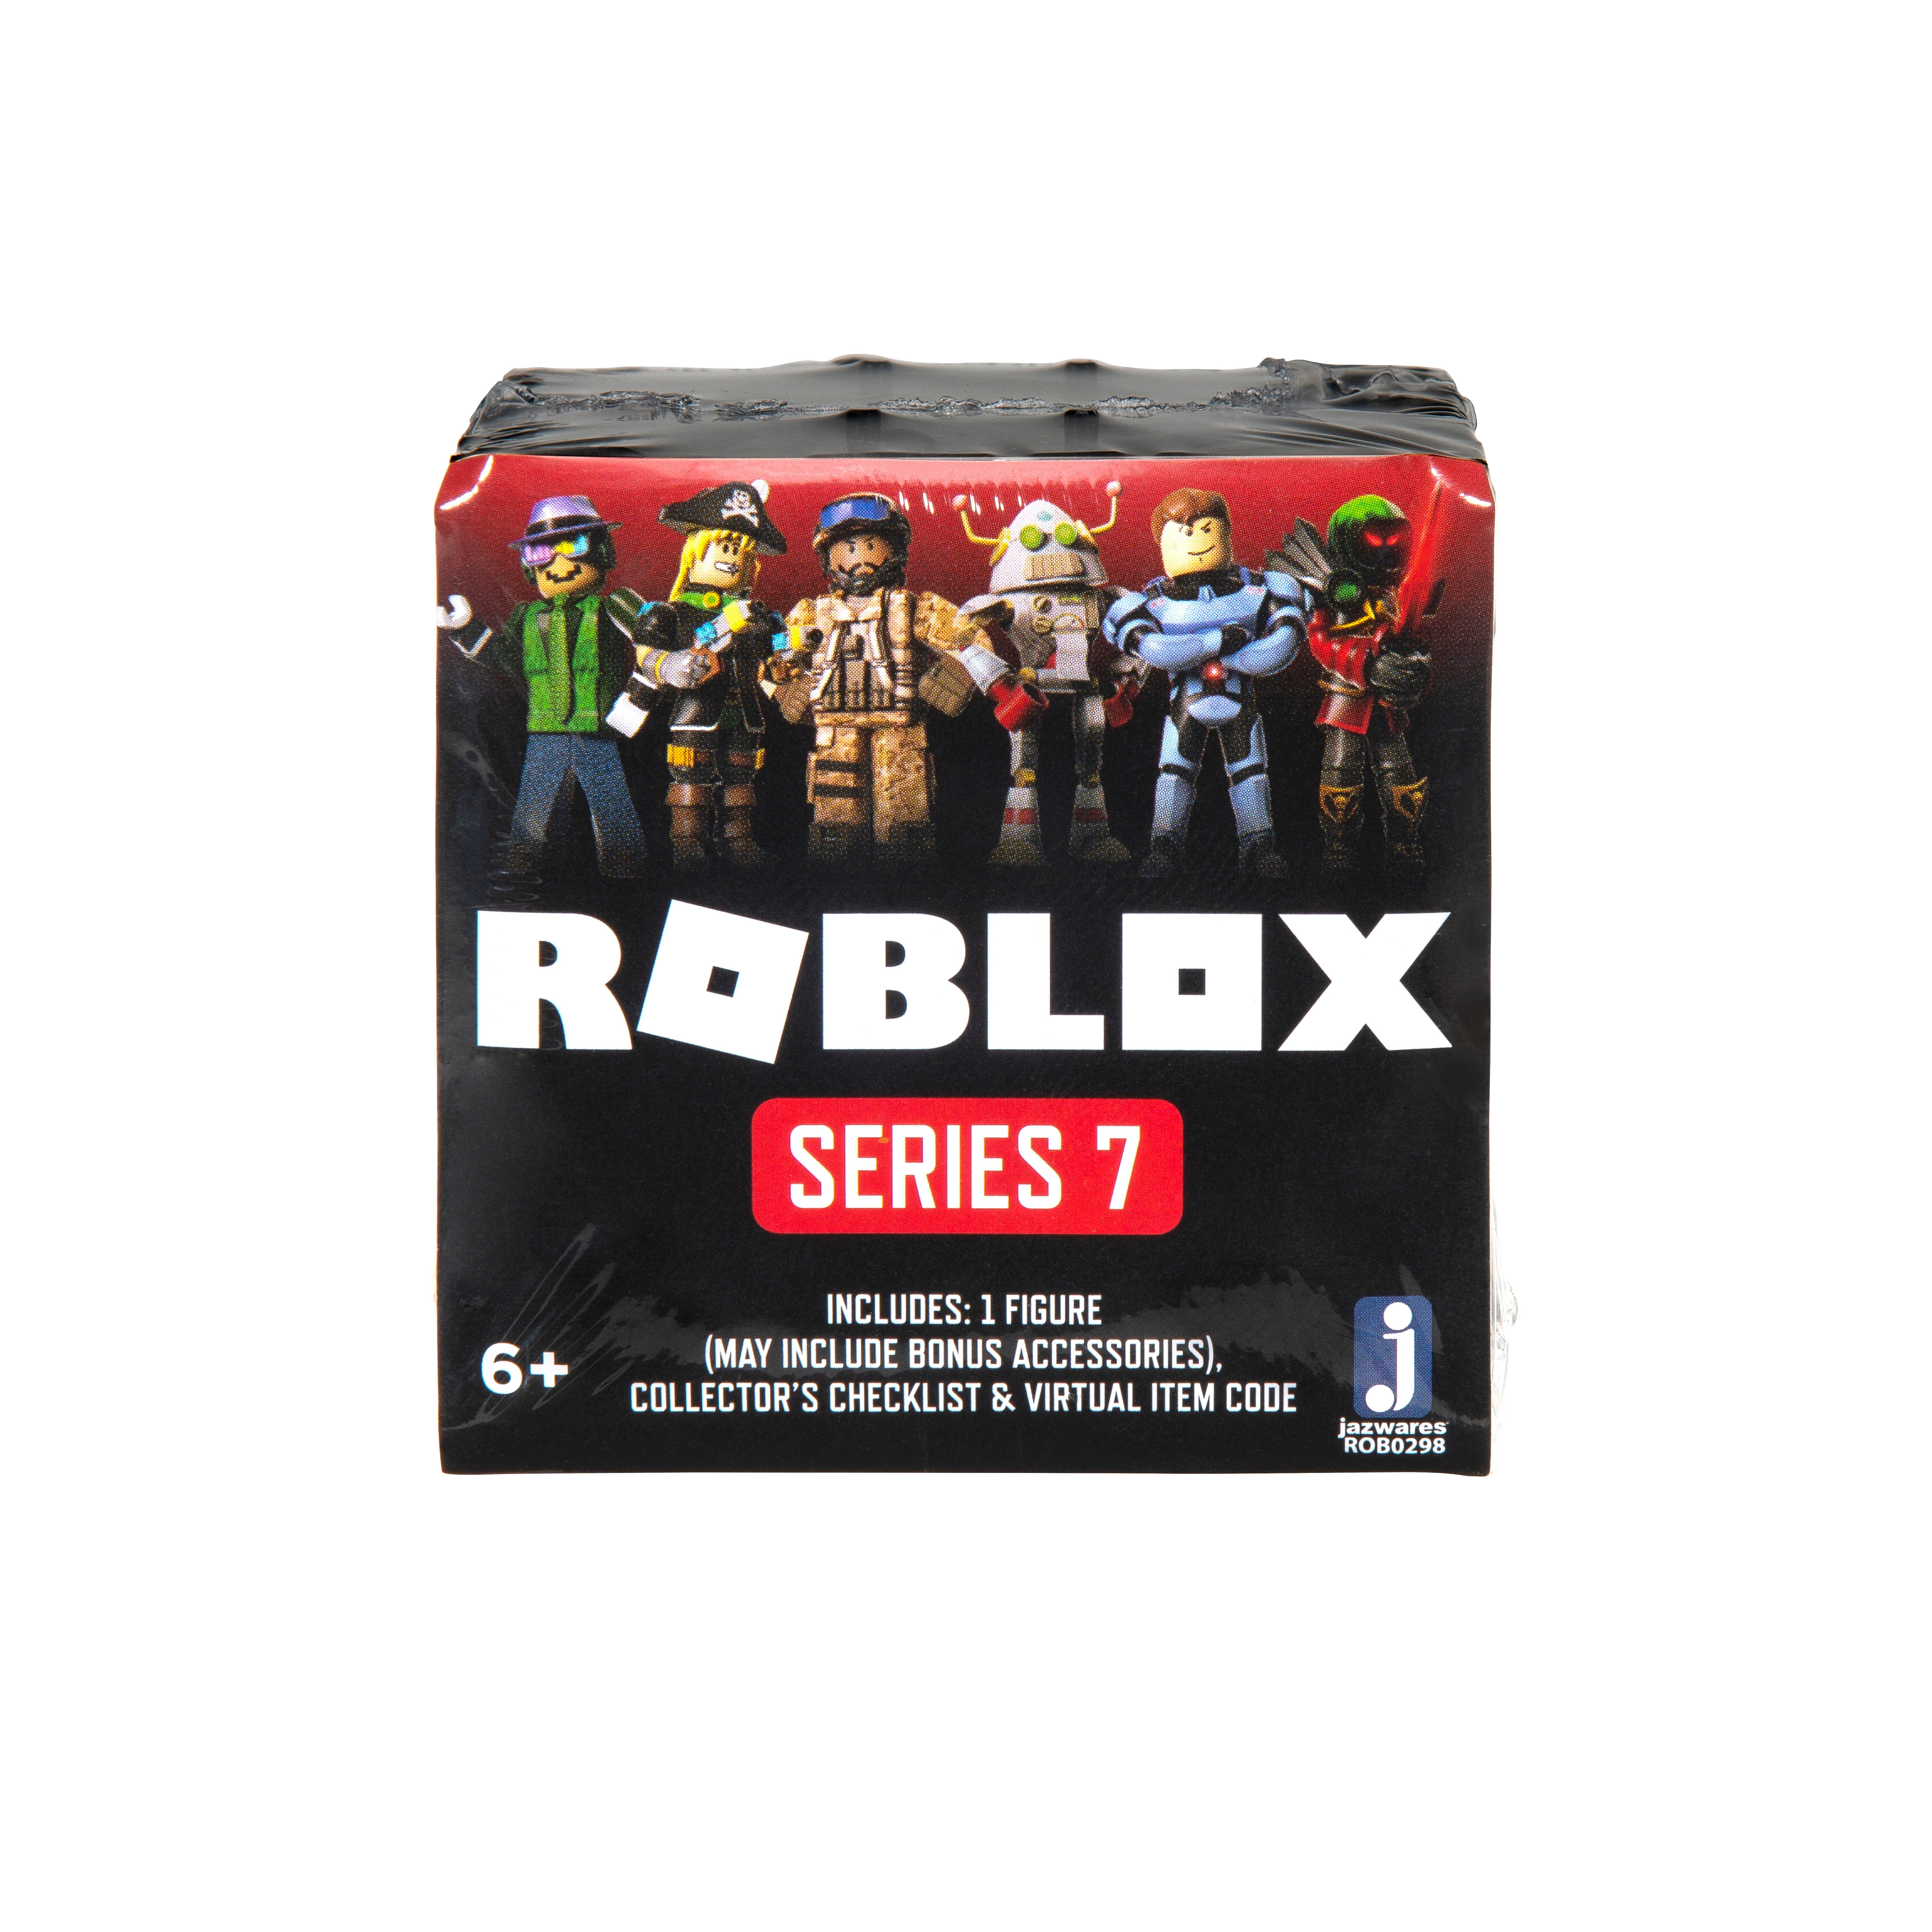 Roblox Action Collection Series 7 Mystery Figure Includes 1 Figure And Exclusive Virtual Item Gamestop - roblox bossk